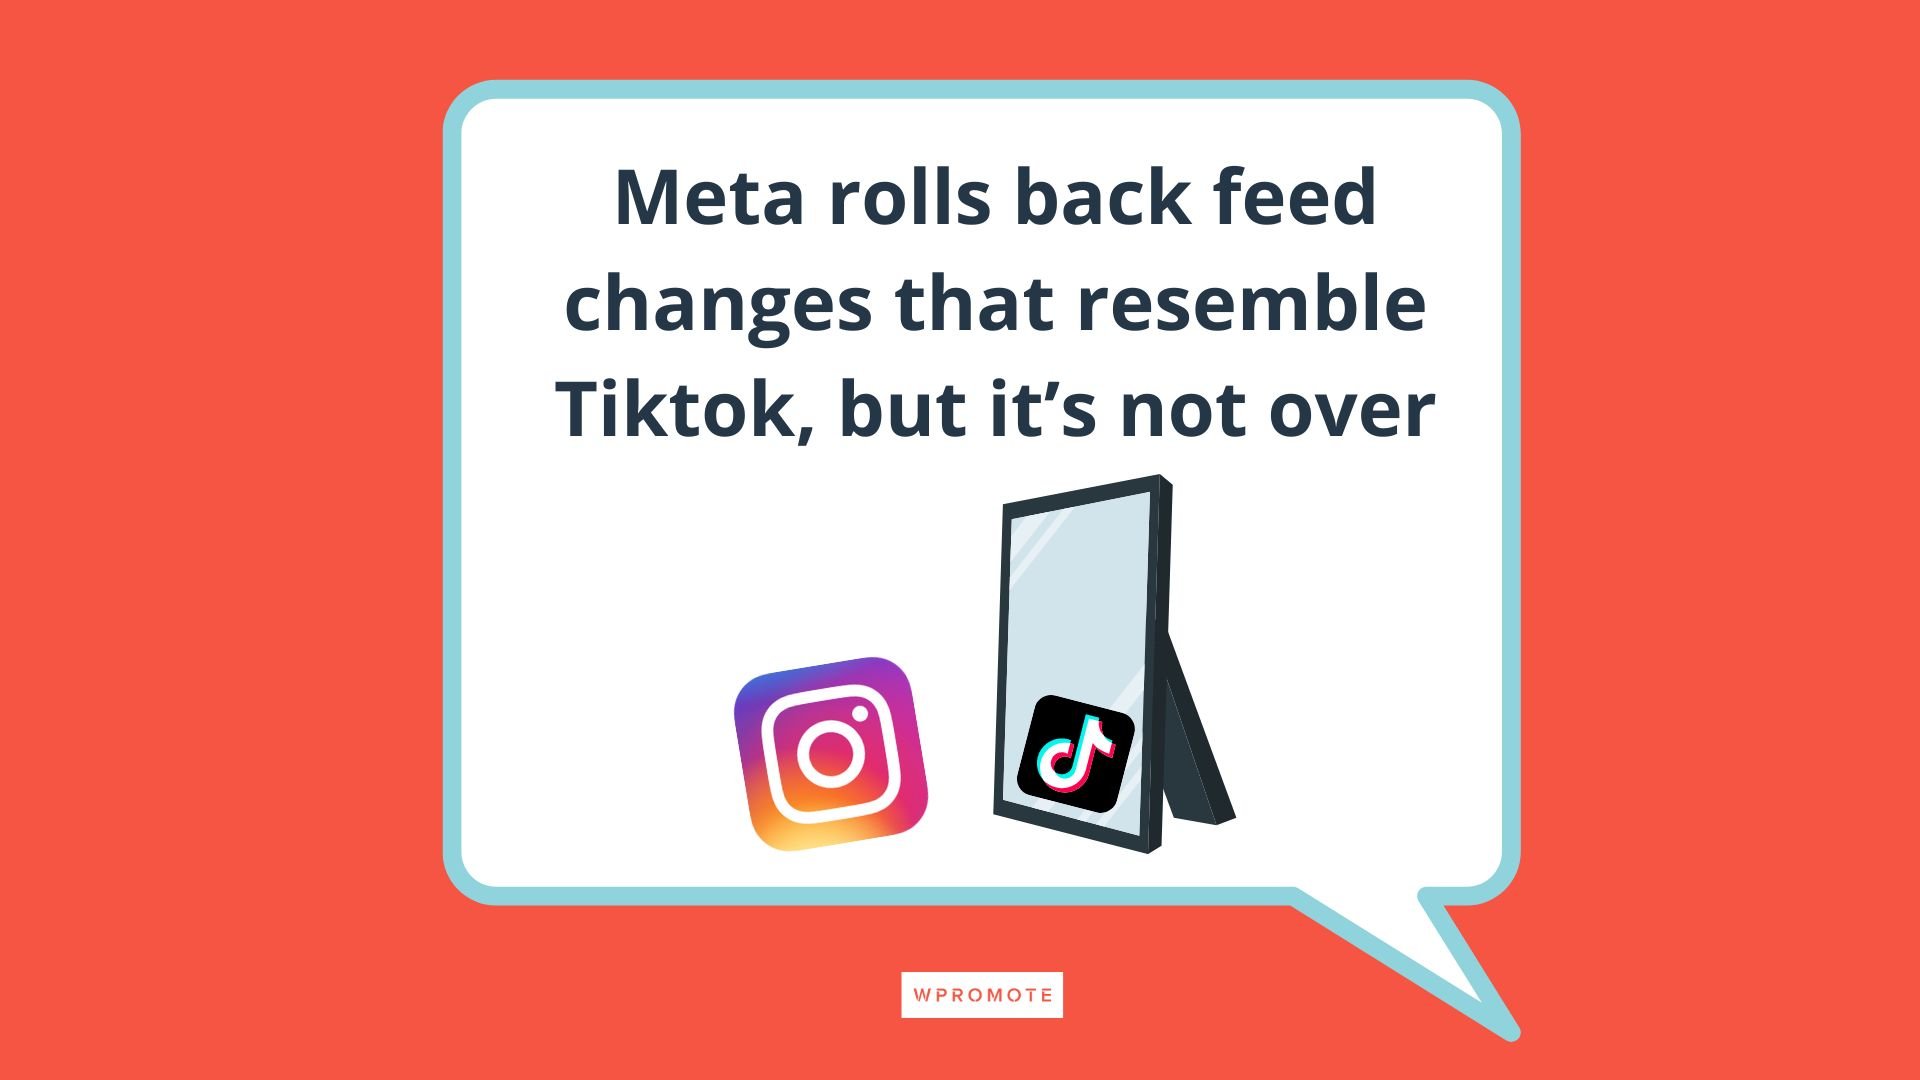 Meta rolls back feed changes that resemble Tiktok, but it's not over